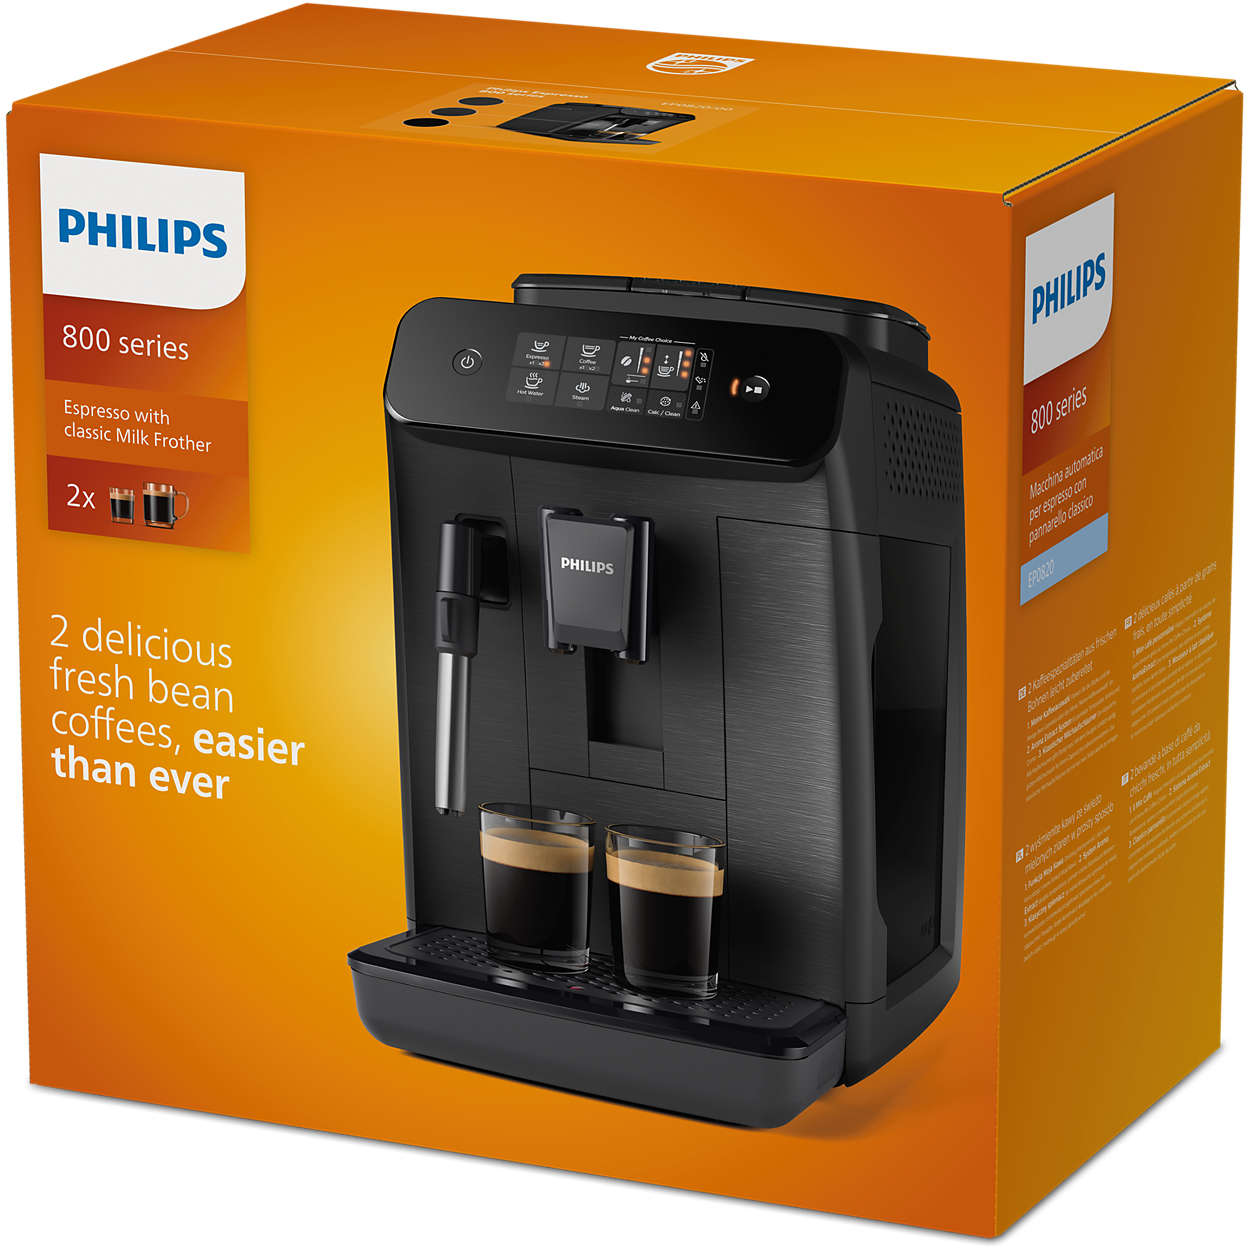 Series Fully 800 automatic | Philips espresso EP0820/04 machines